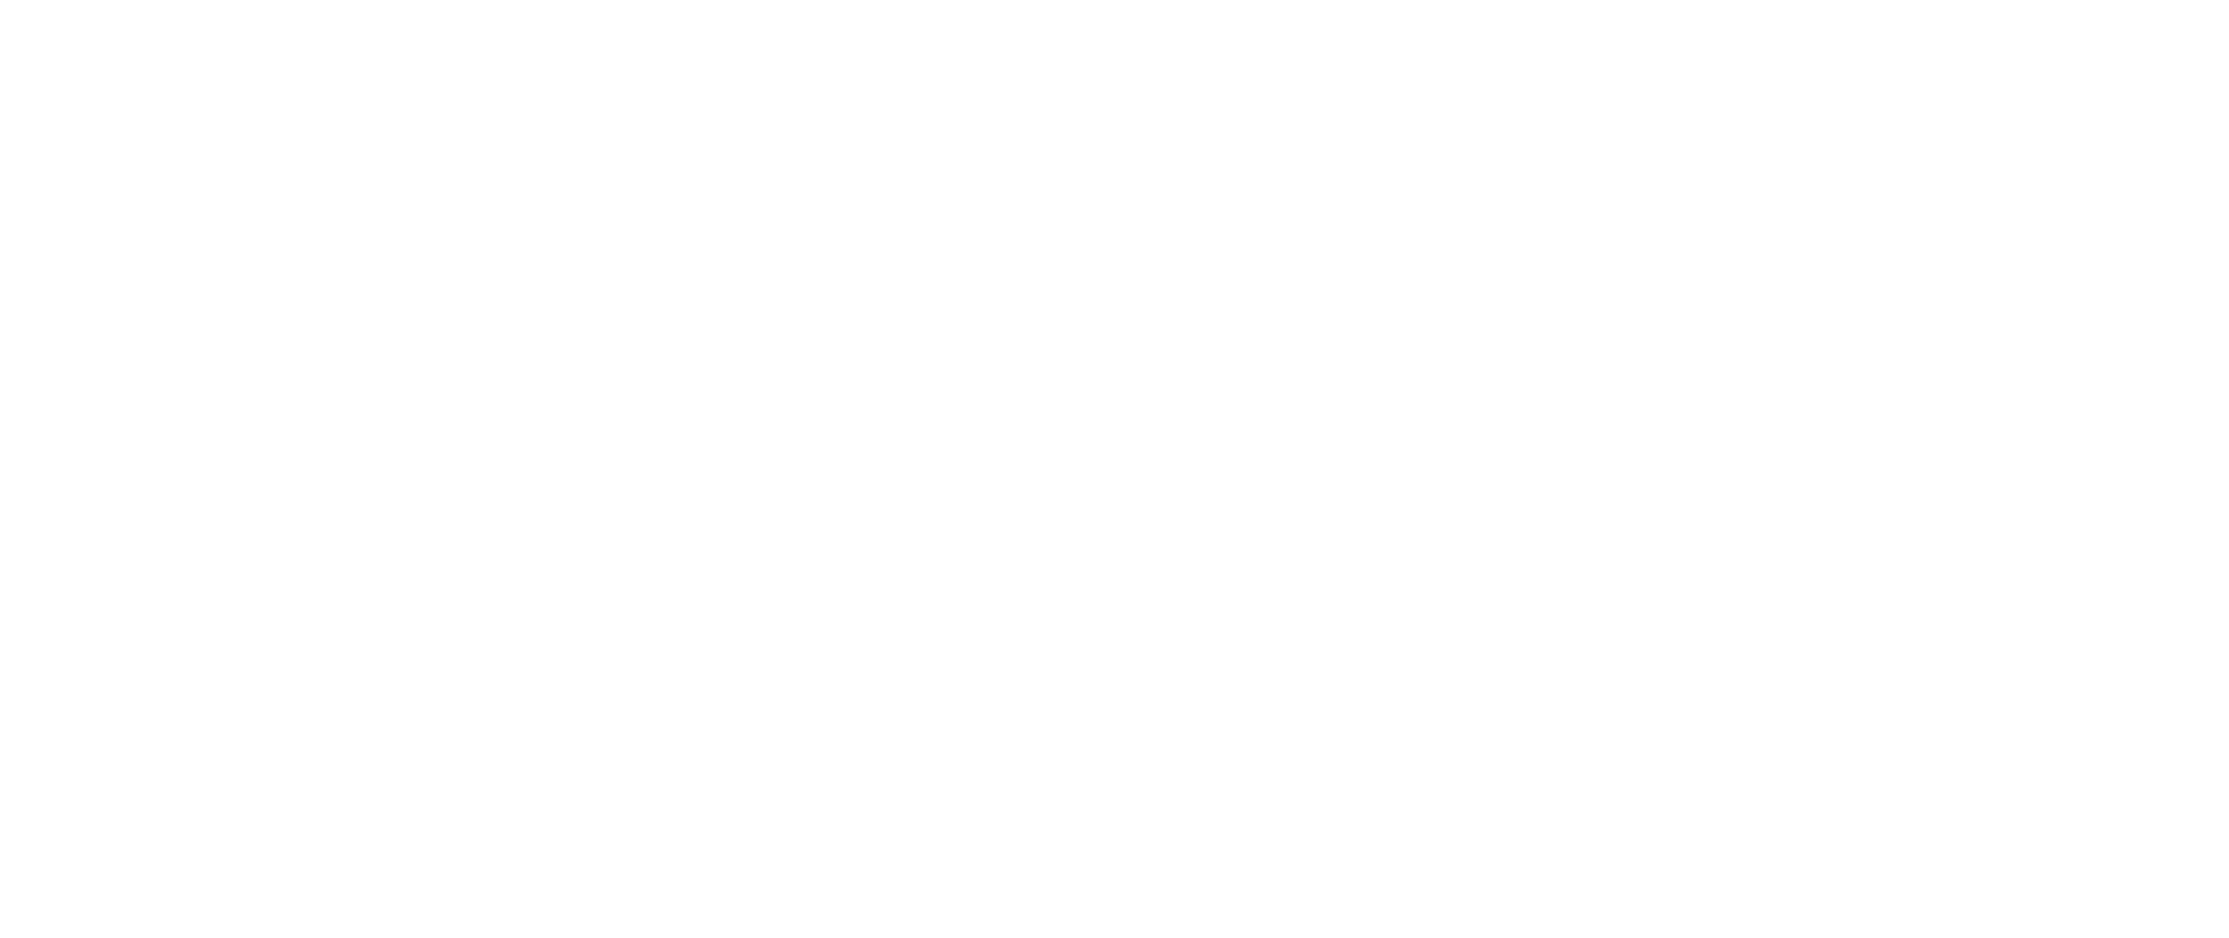 critical thinking questions for esl students